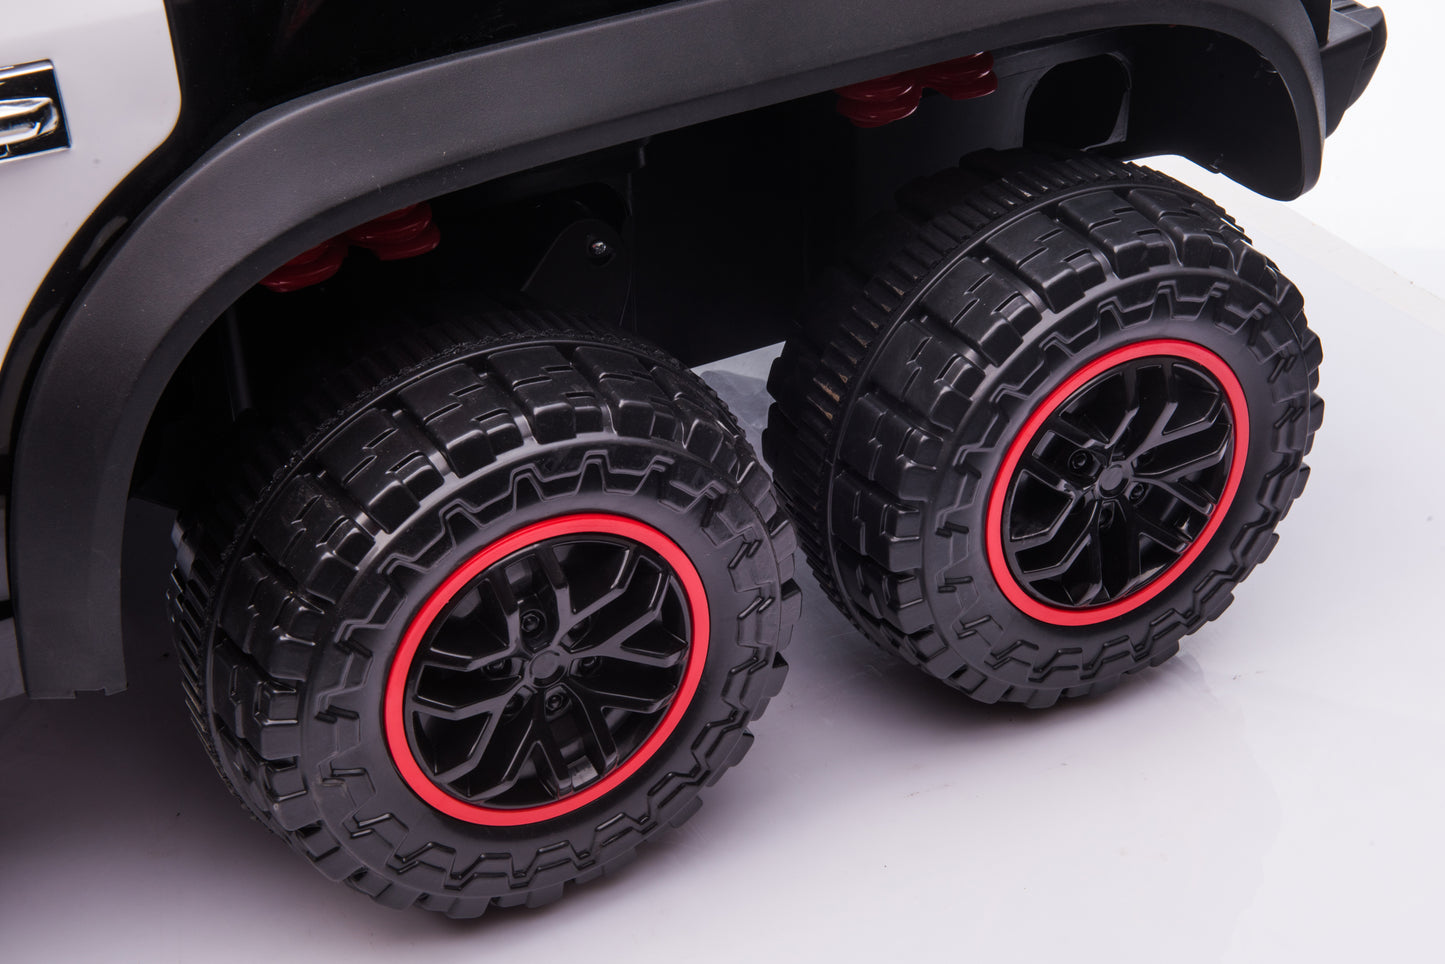 24VUSB/MP3/Bluetooth Four Wheel Absorber with Music and Light, 2 Doors, Power Display, 2.4G R/C